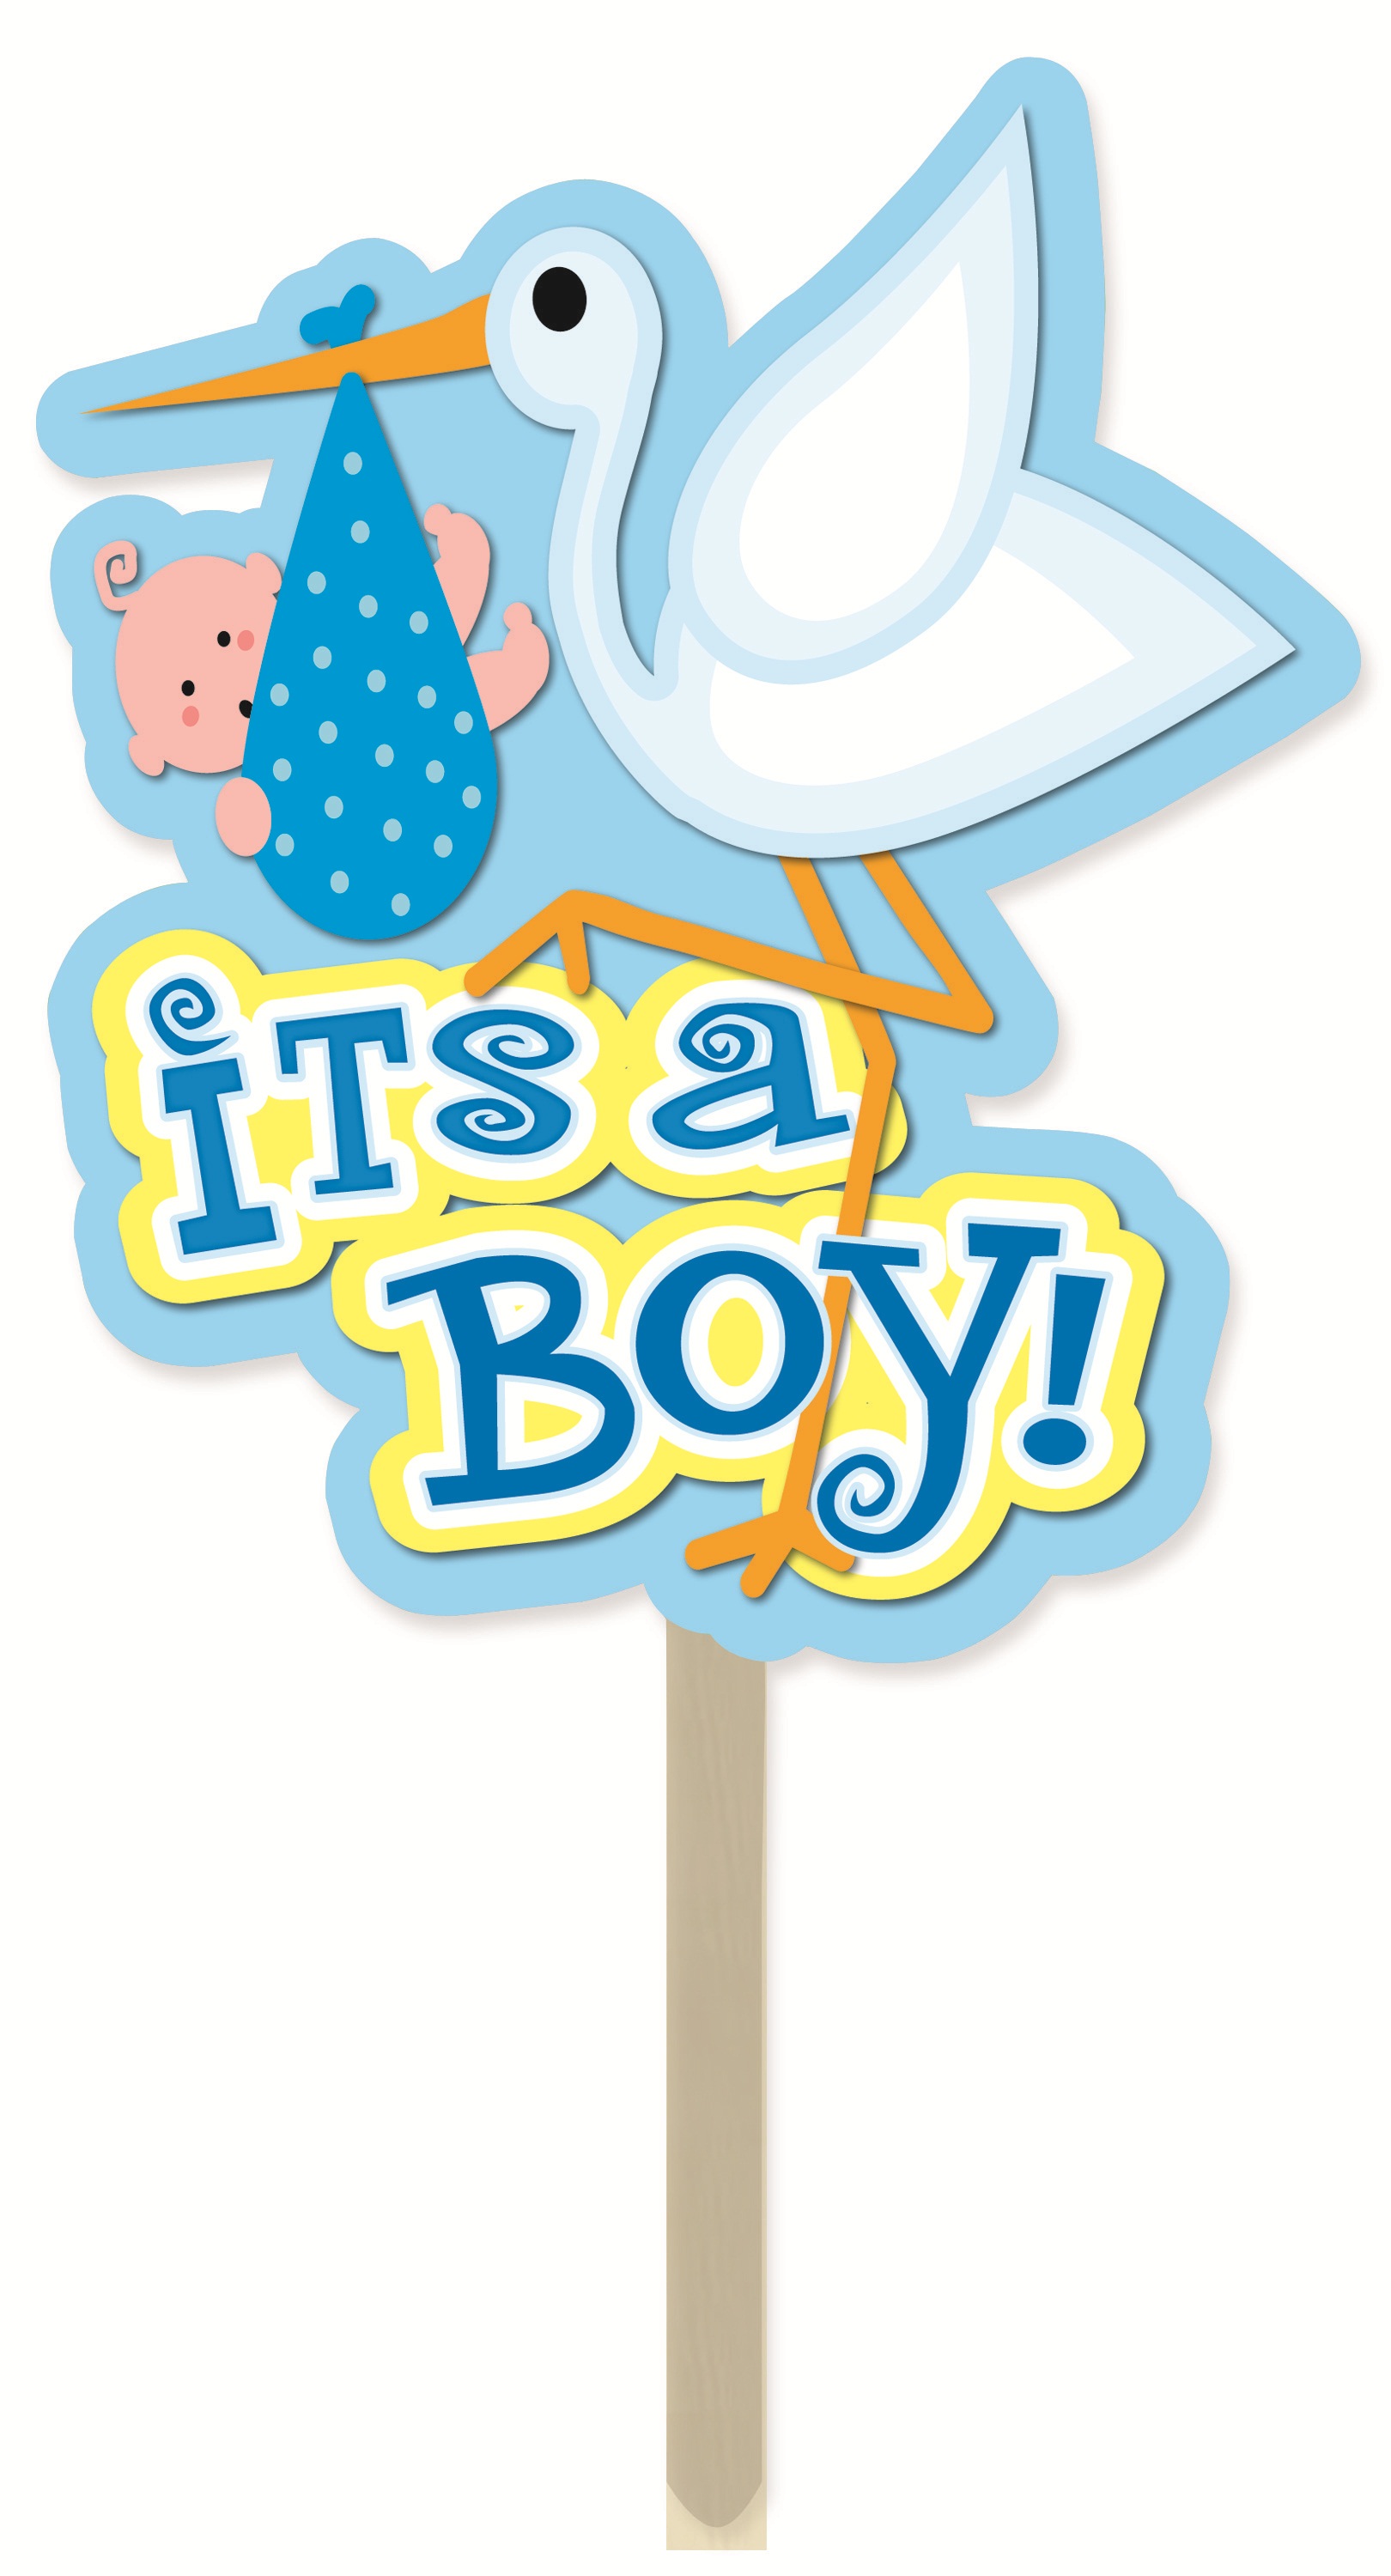 It's a Boy! The Royal Baby is born. - SPYHollywood